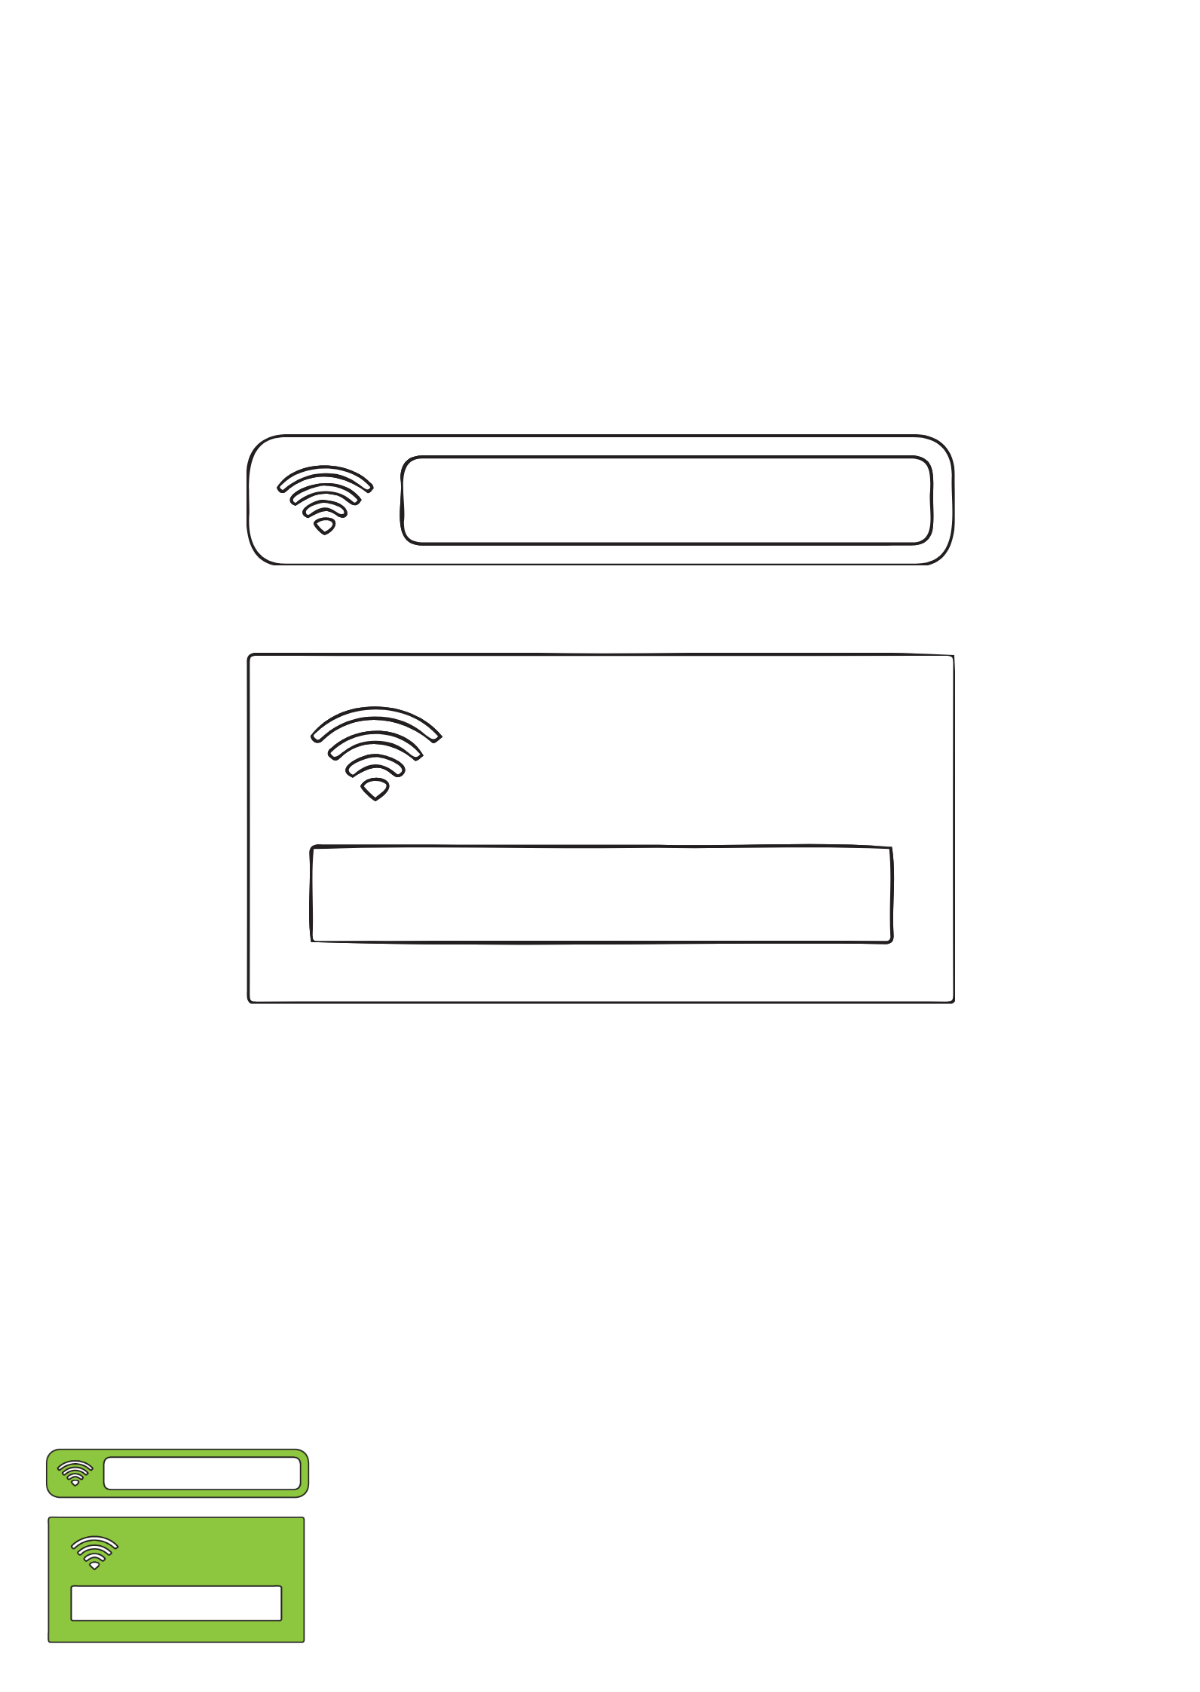 Free Wifi Password coloring page Template